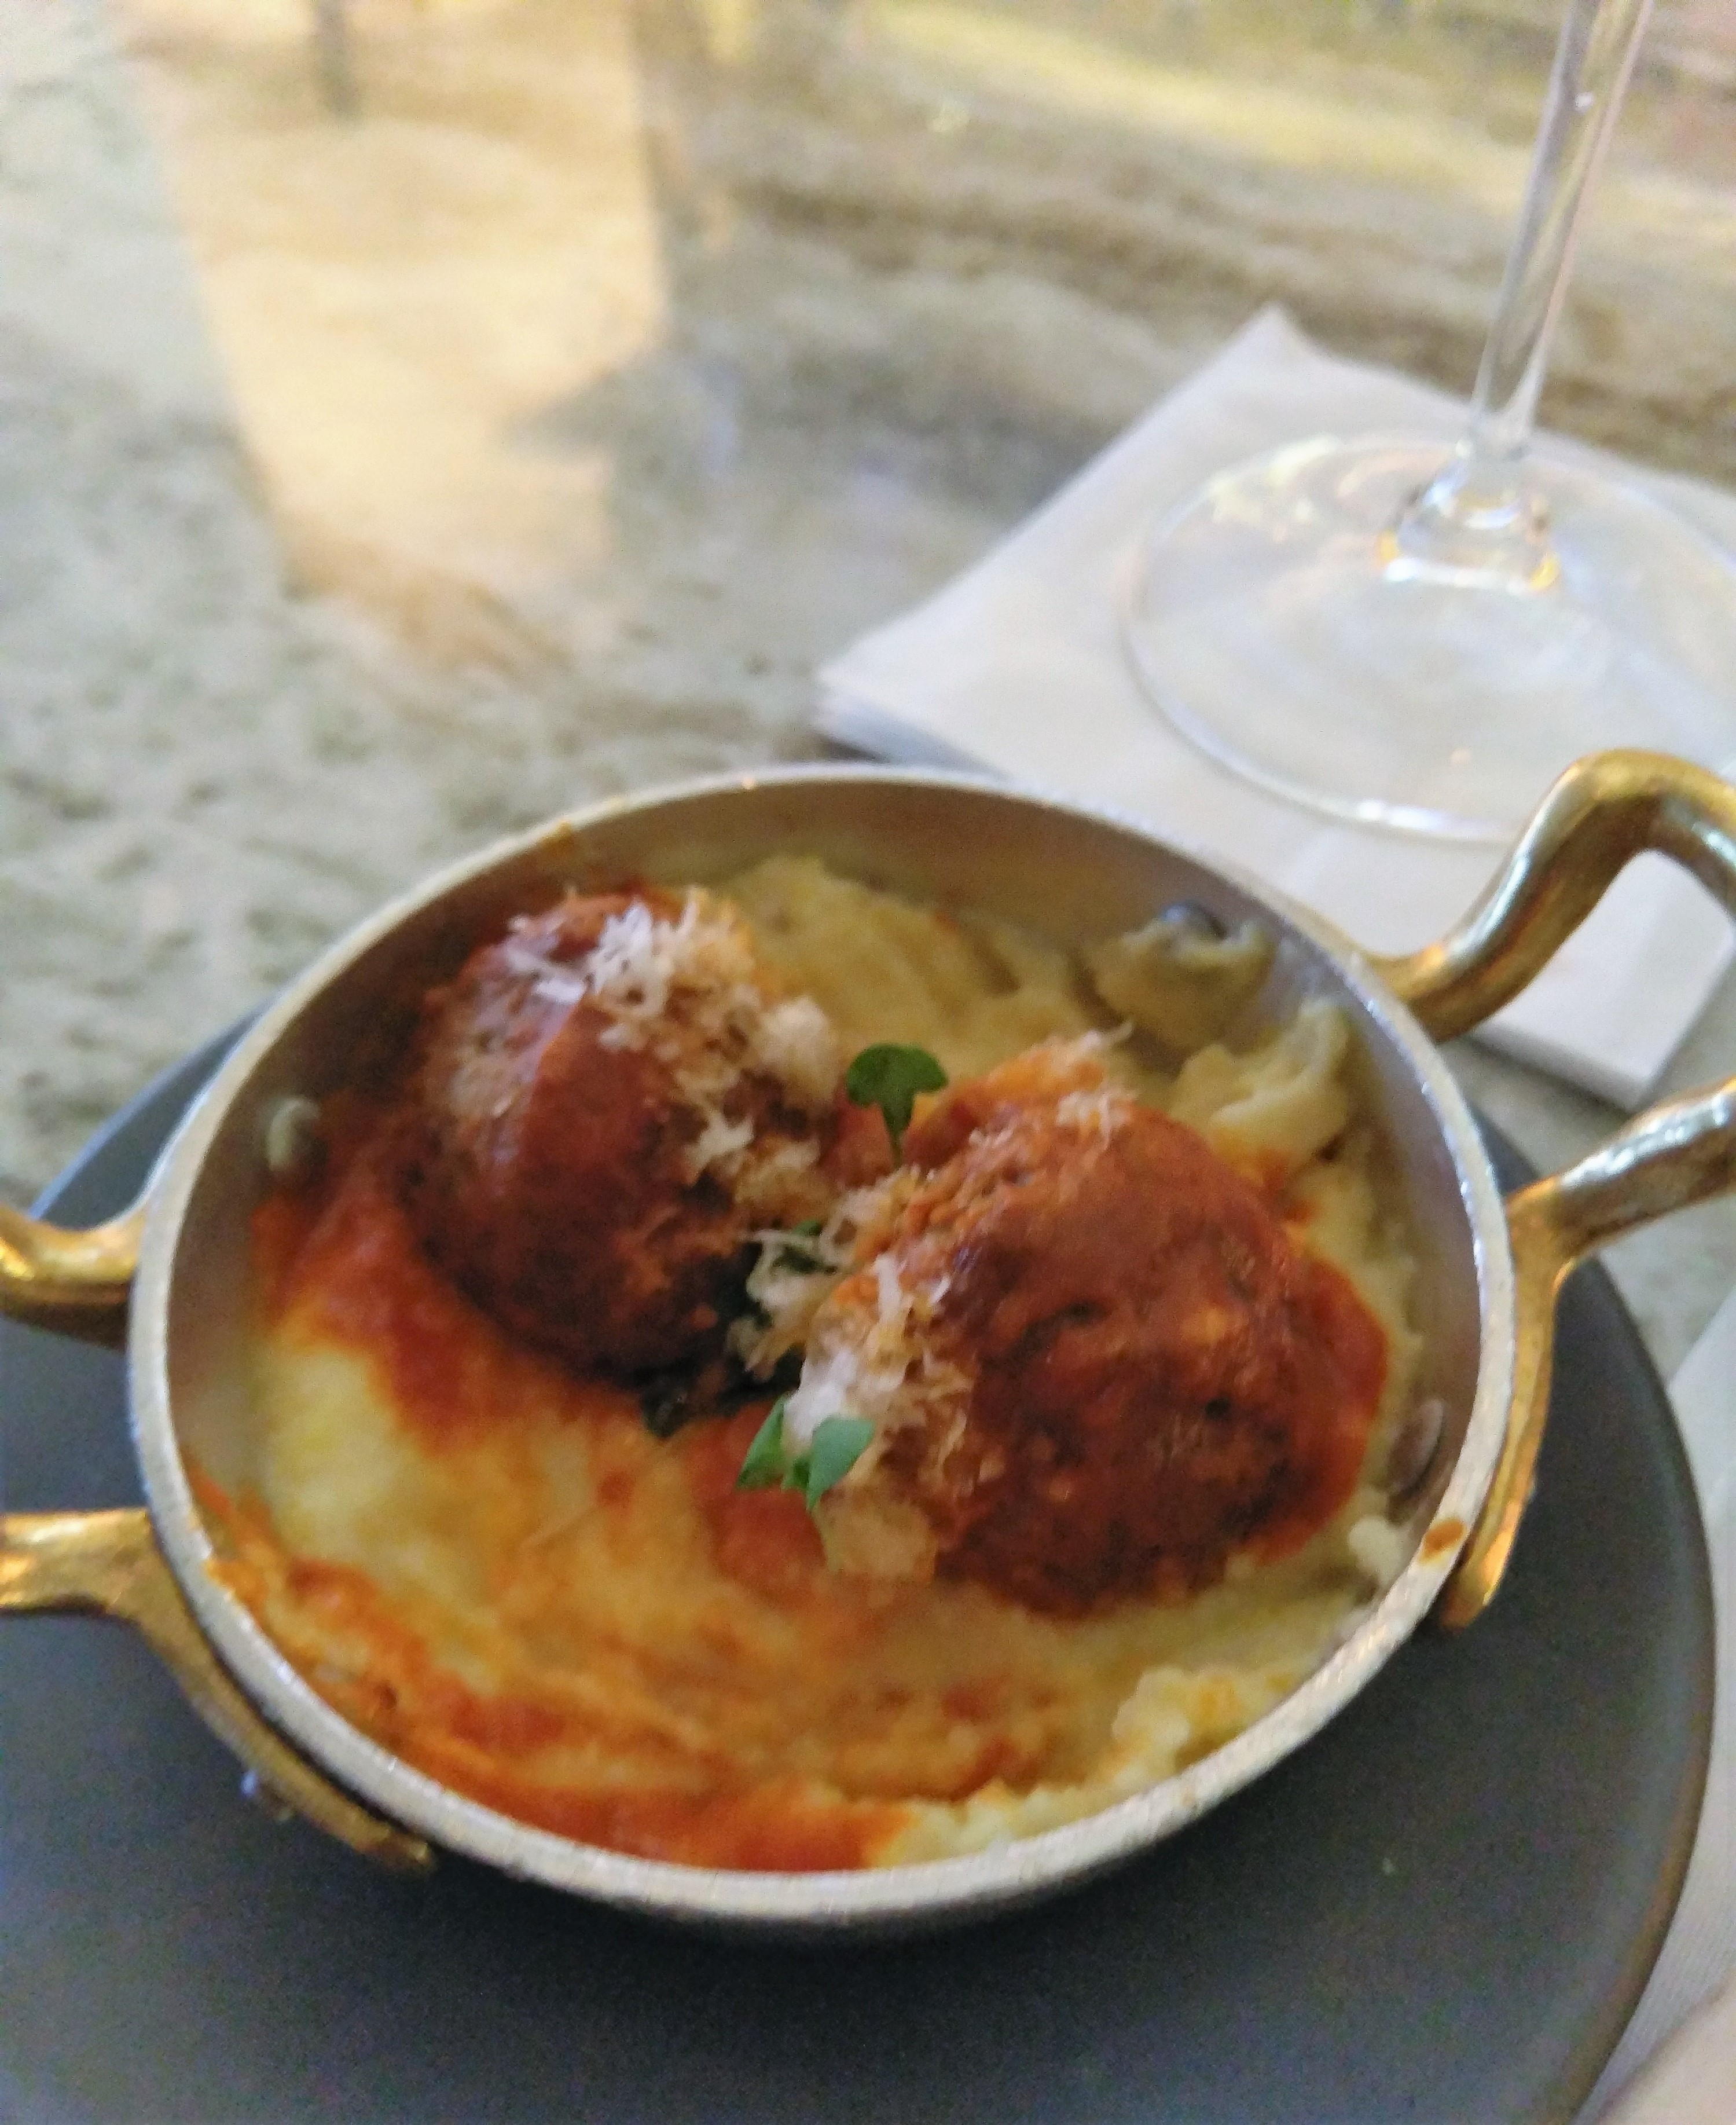 DIG Scottsdale Fat Ox veal meatballs with giusto polenta, San Marzano tomato, basil and parmesan